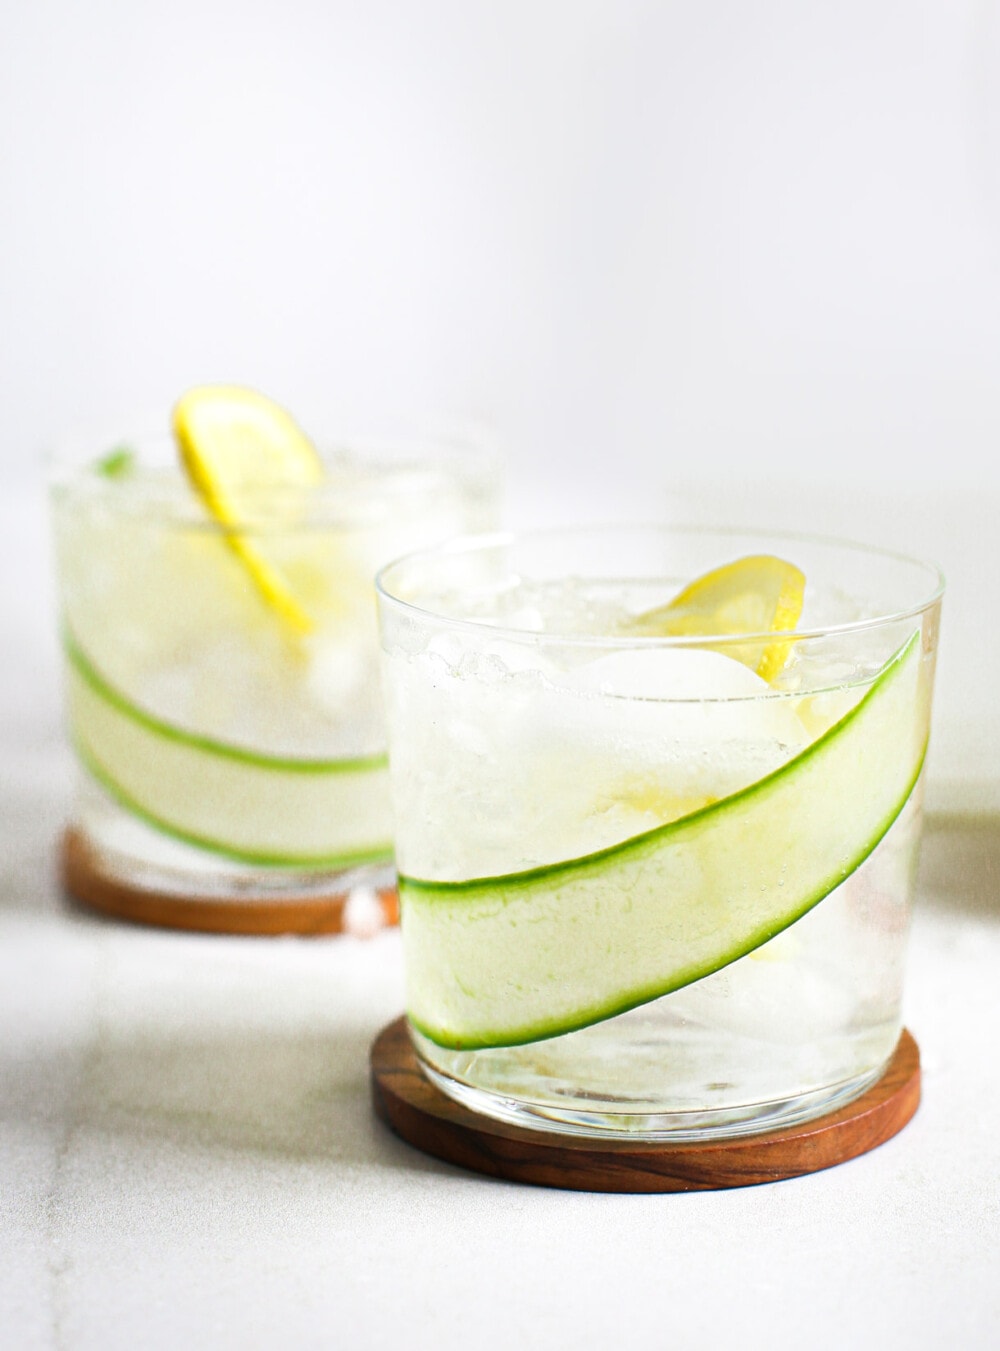 cucumber lemon water in clear glass, sitting on wooden coaster